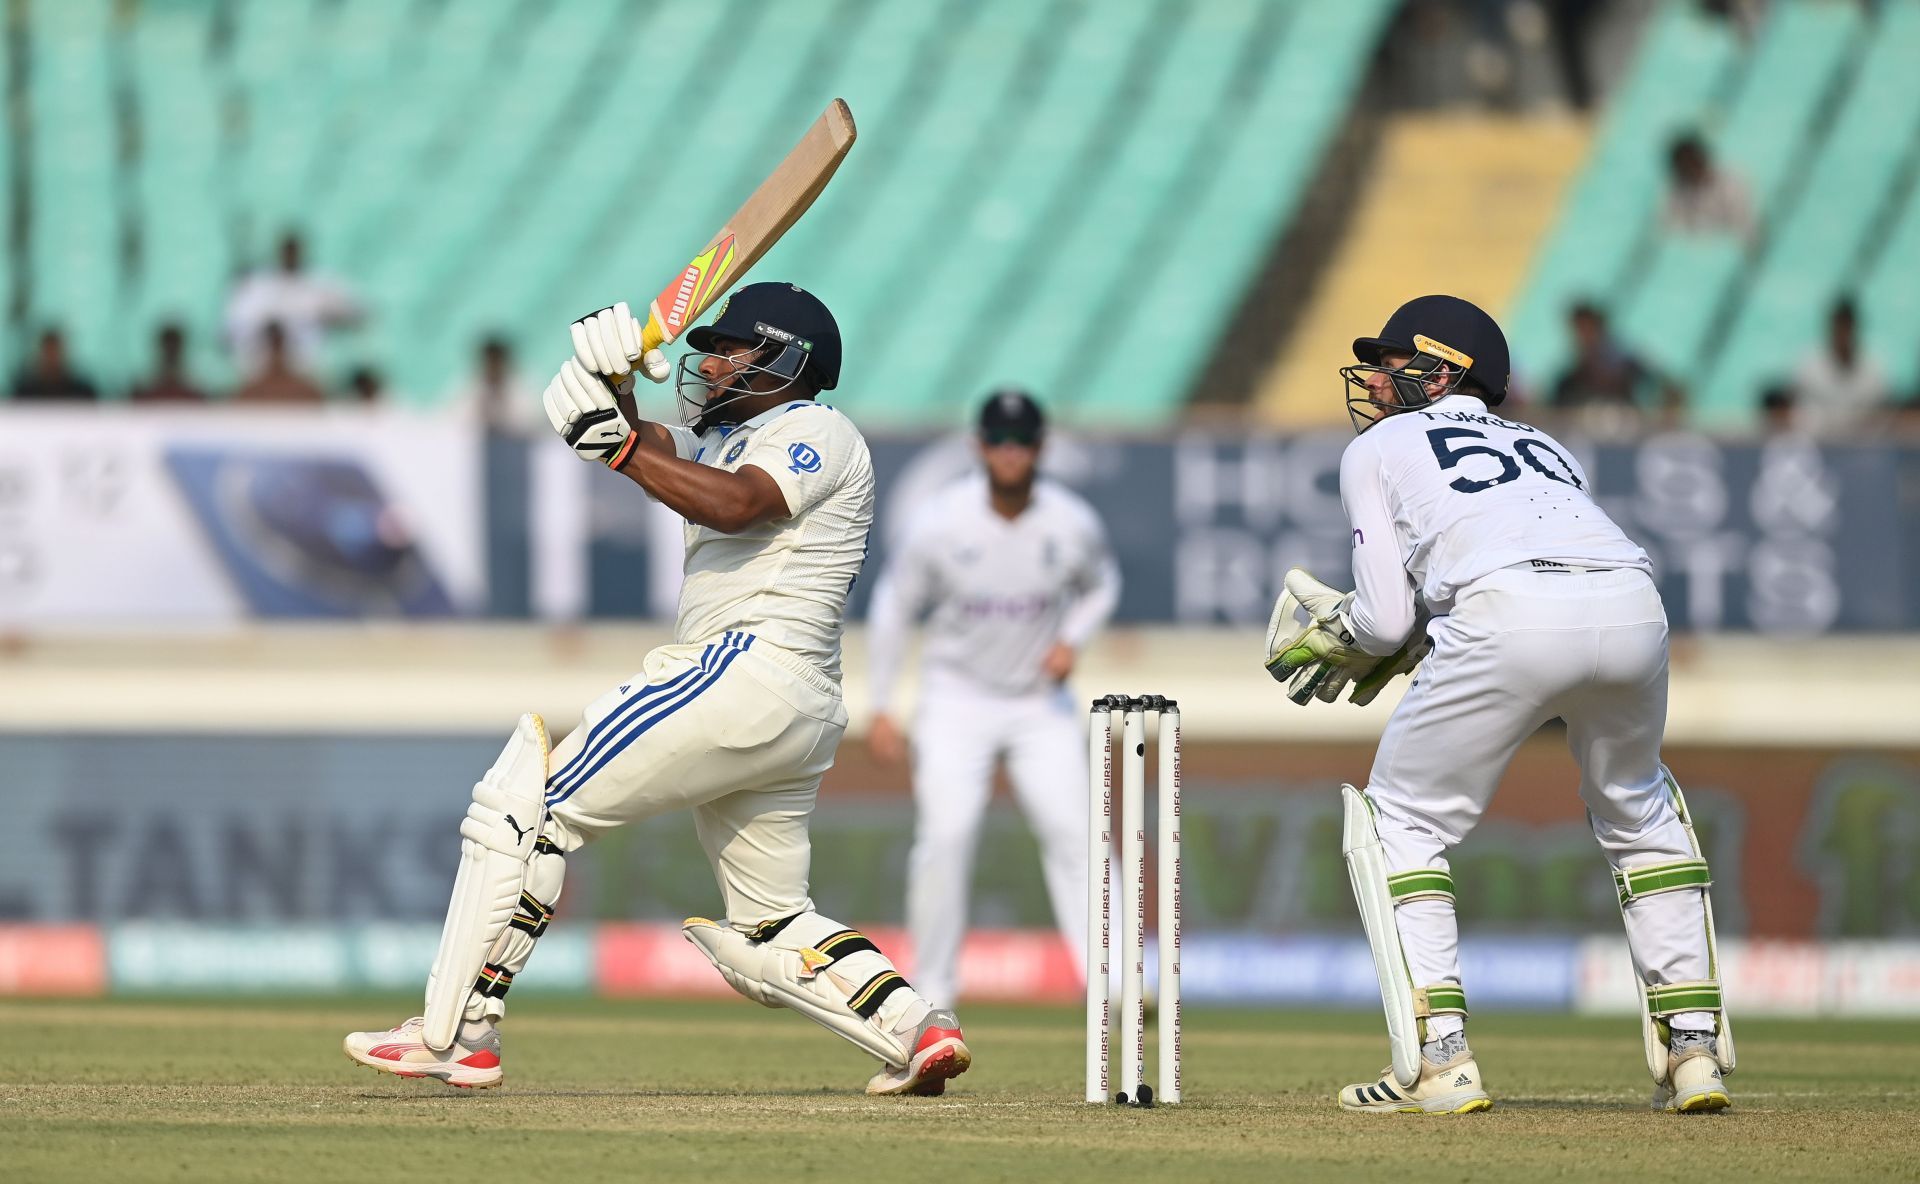 Sarfaraz Khan scored his runs at a strike rate of nearly 94 in both innings. [P/C: Getty]